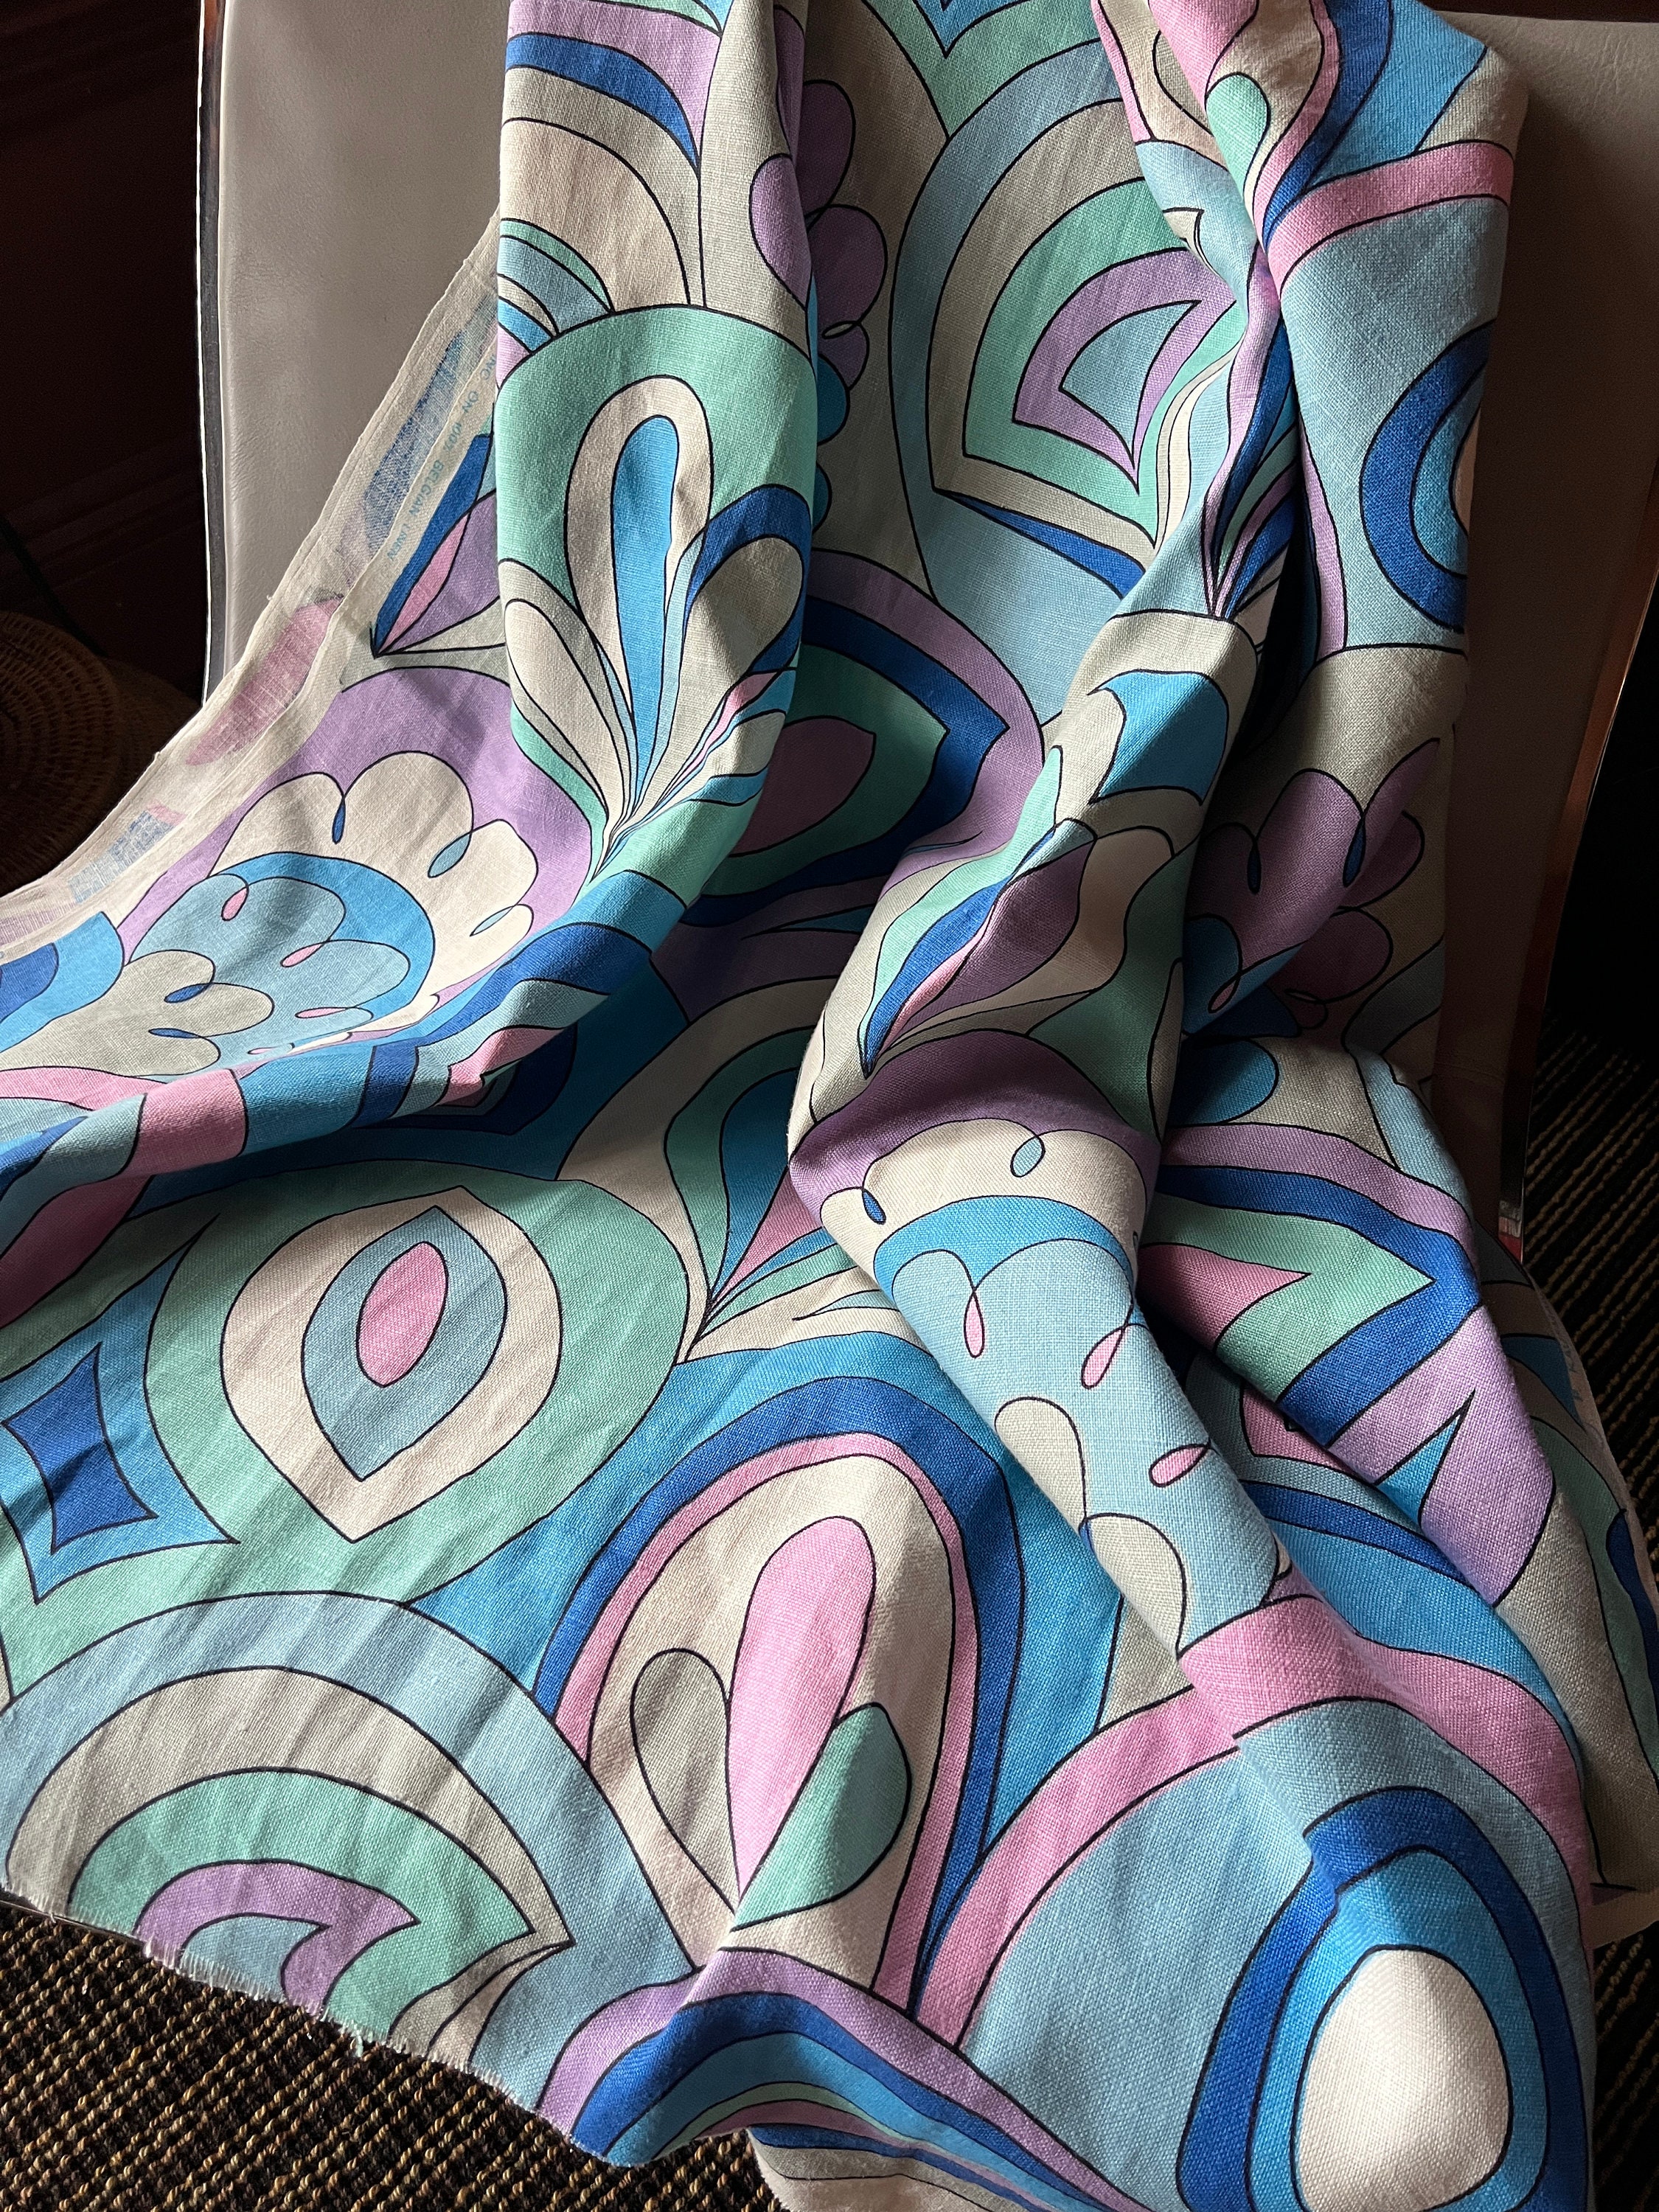 Louis Vuitton Pucci Linen weave 100% Cotton Fabric for Upholstery, Bedding,  Drapery, Even Clothing